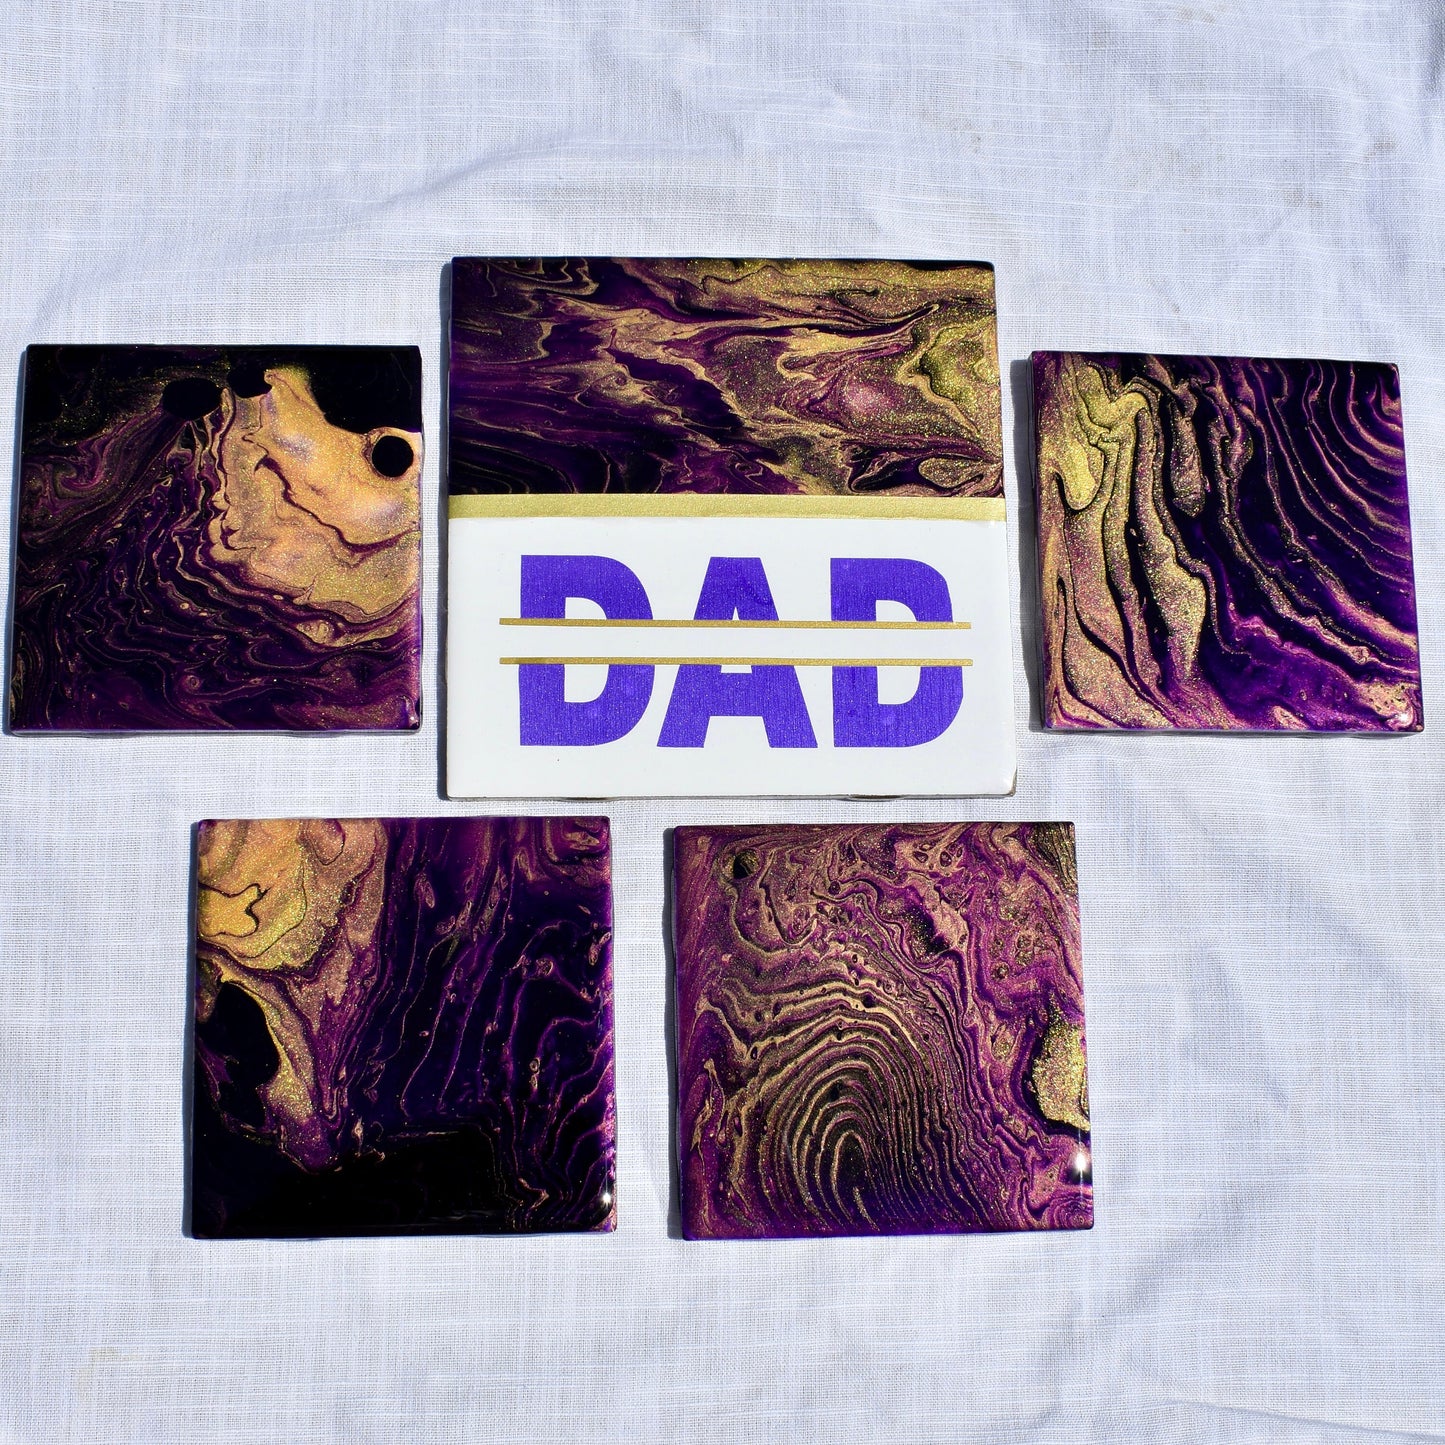 Personalized Dad's Birthday Coasters - Father’s Day Gift - Omega Psi Phi Gift - Purple & Gold Gift - Fraternity Gift - Custom Name Coasters